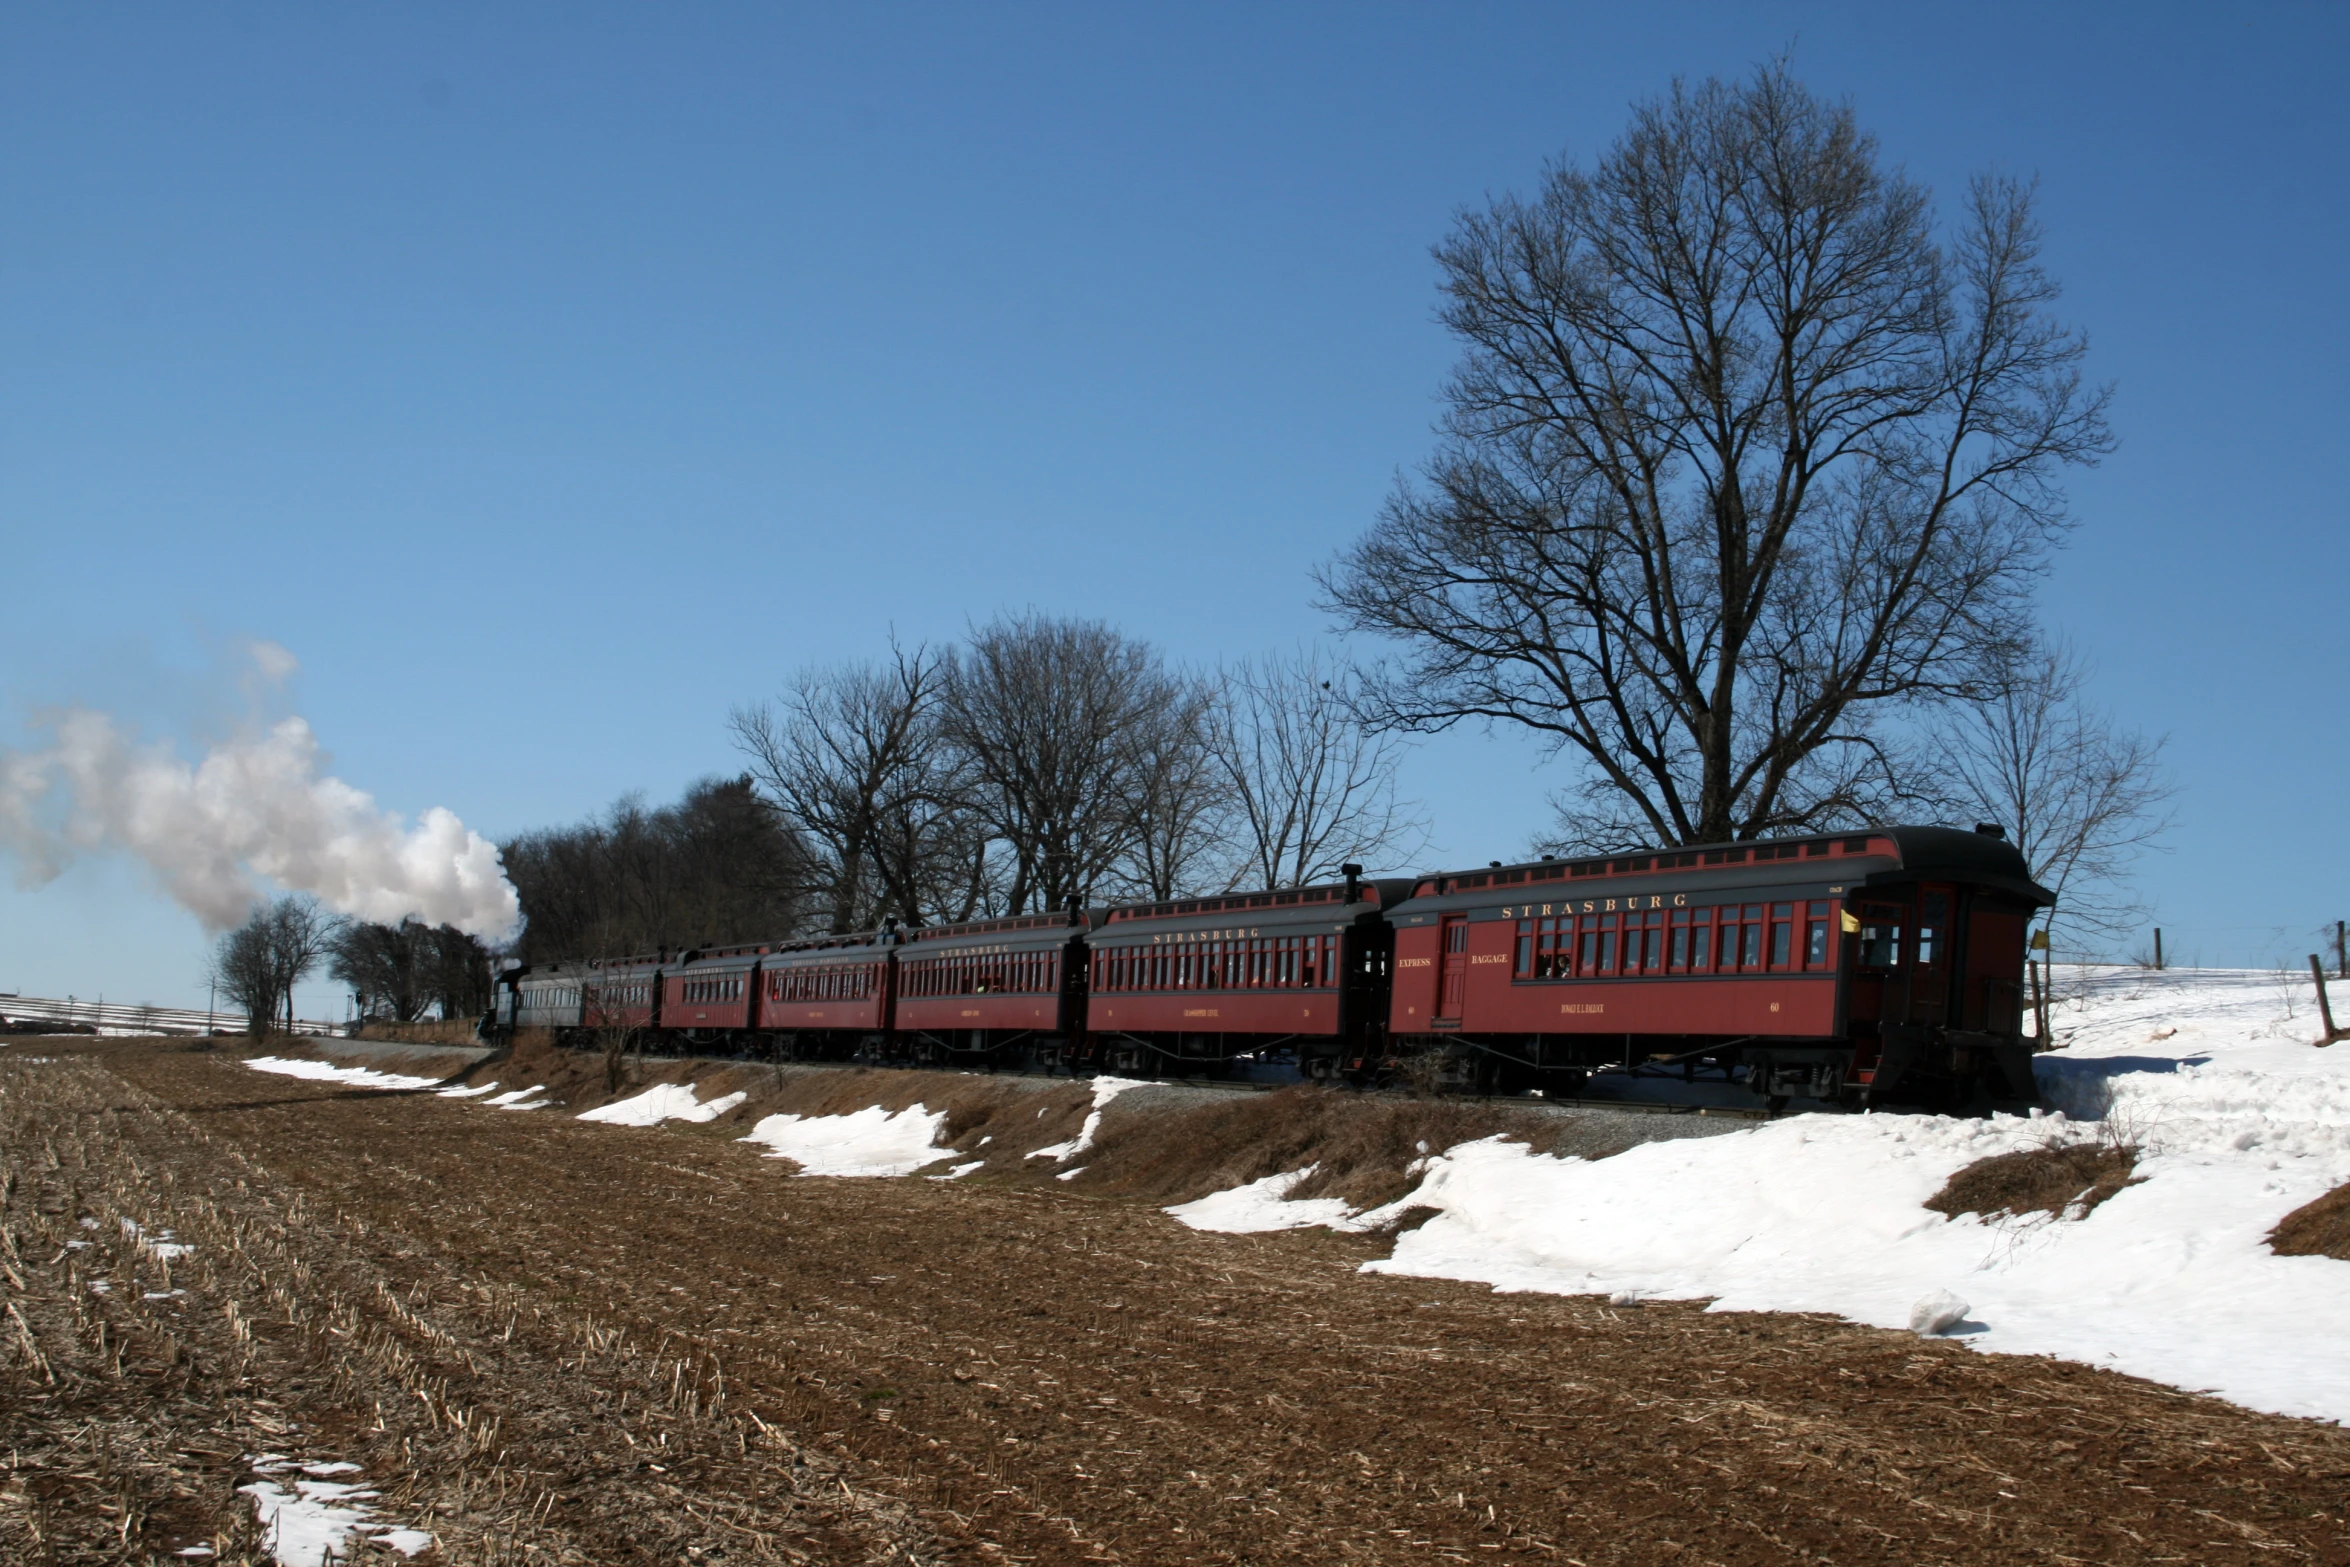 train running along track near snow and bare trees